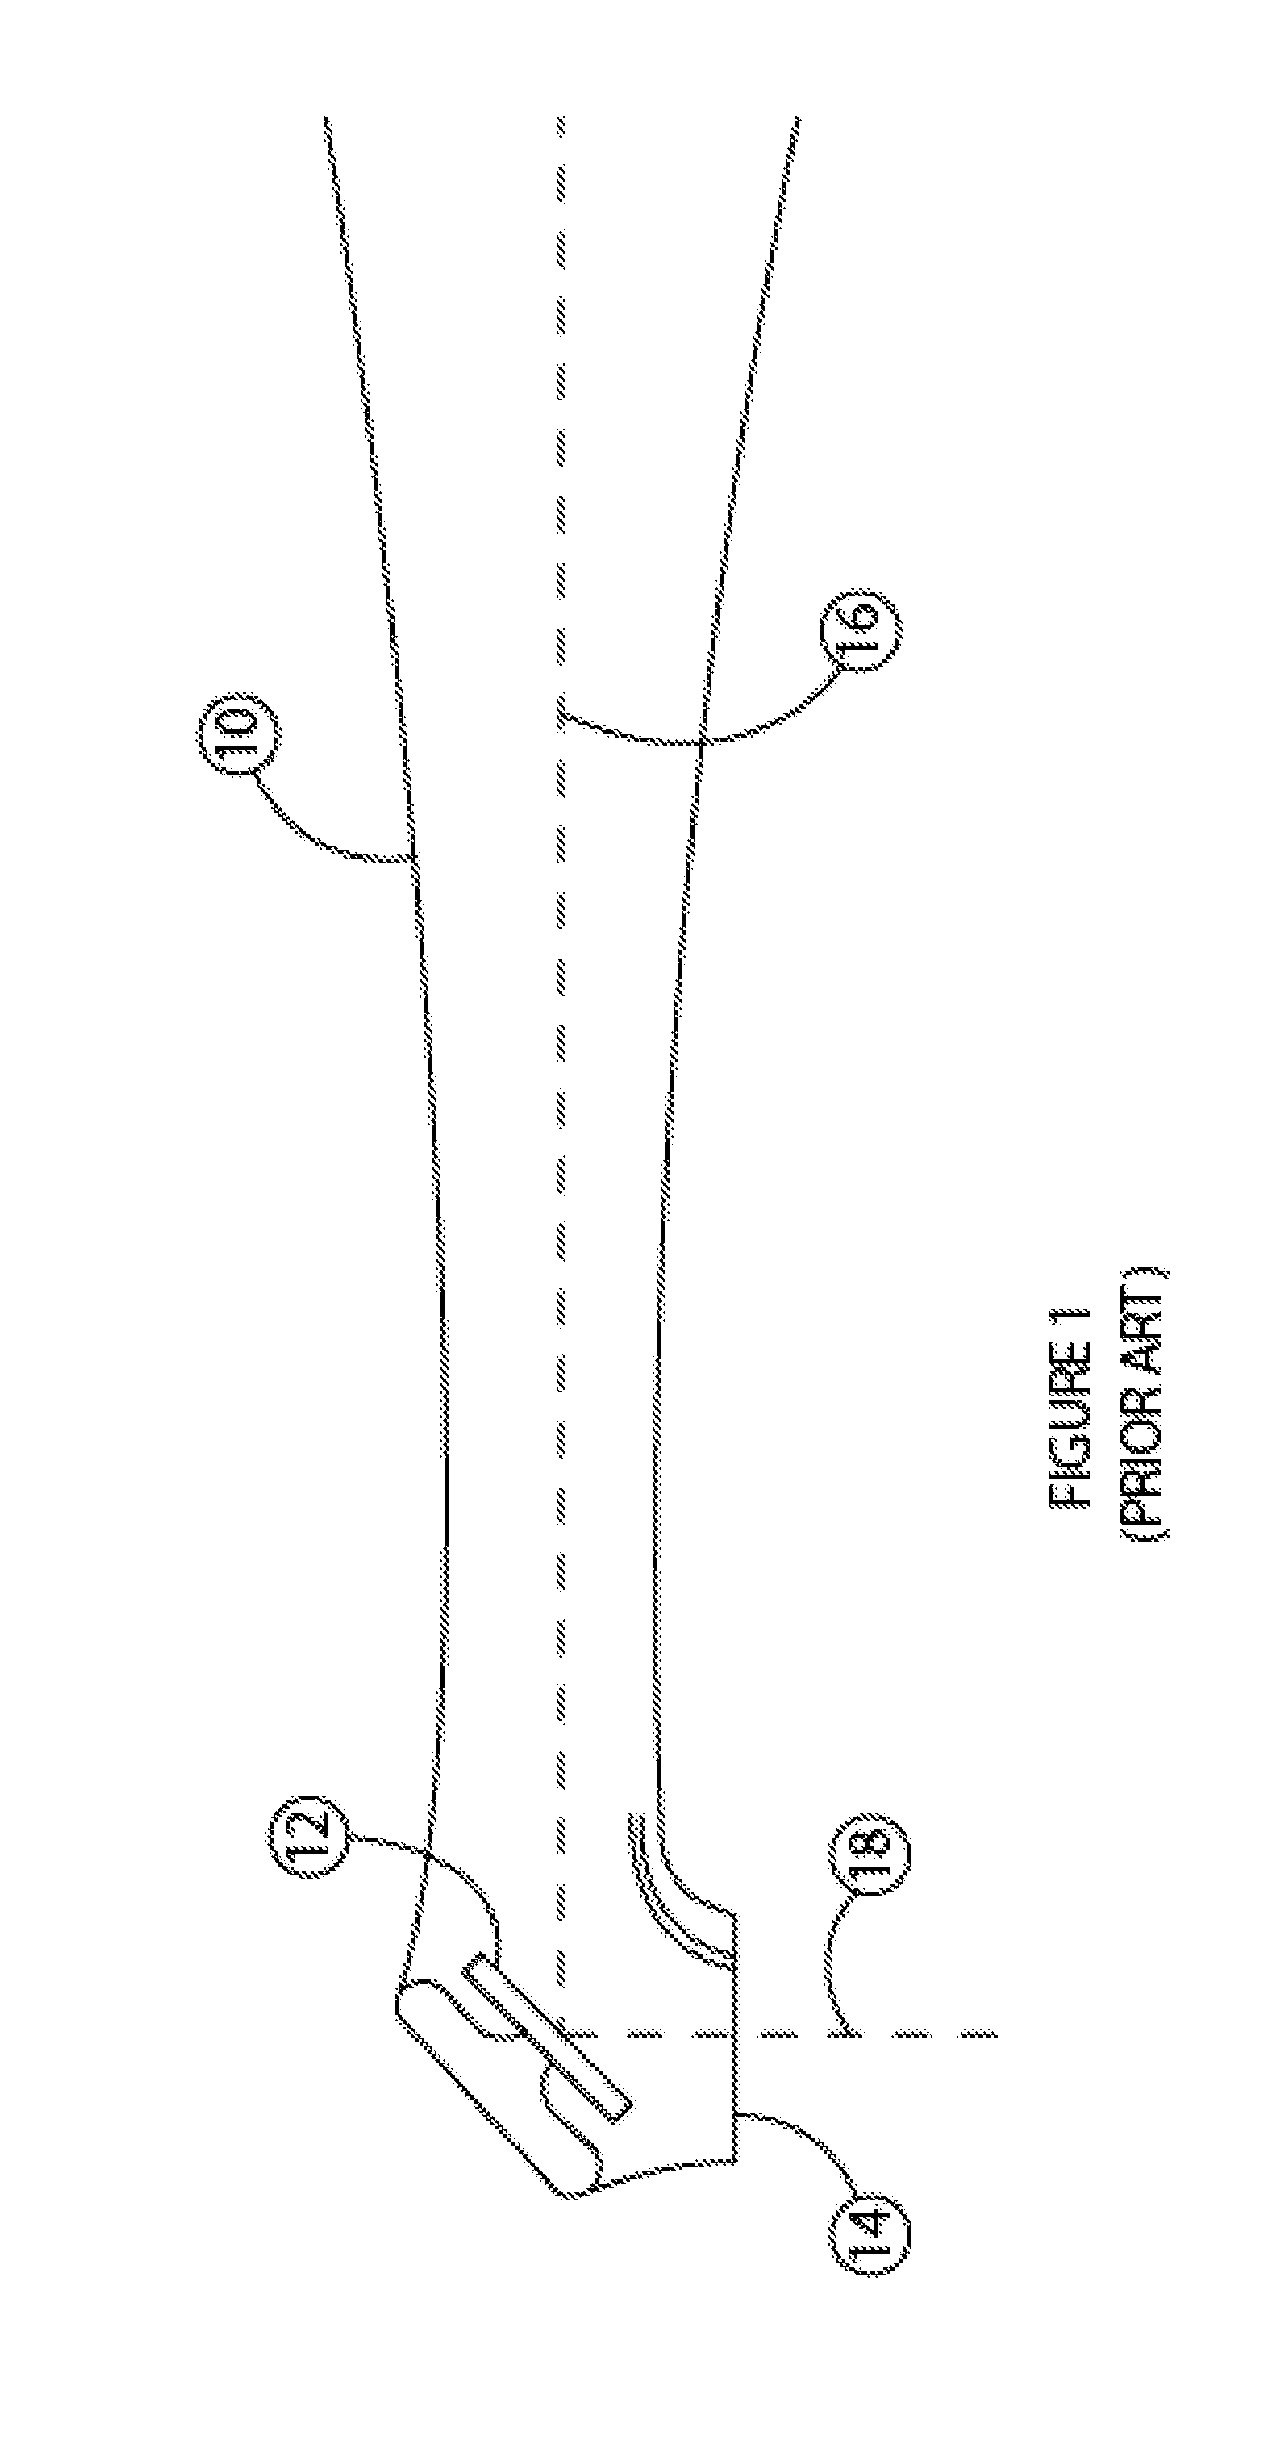 Systems and method for protection of optical system of laser-based apparatus